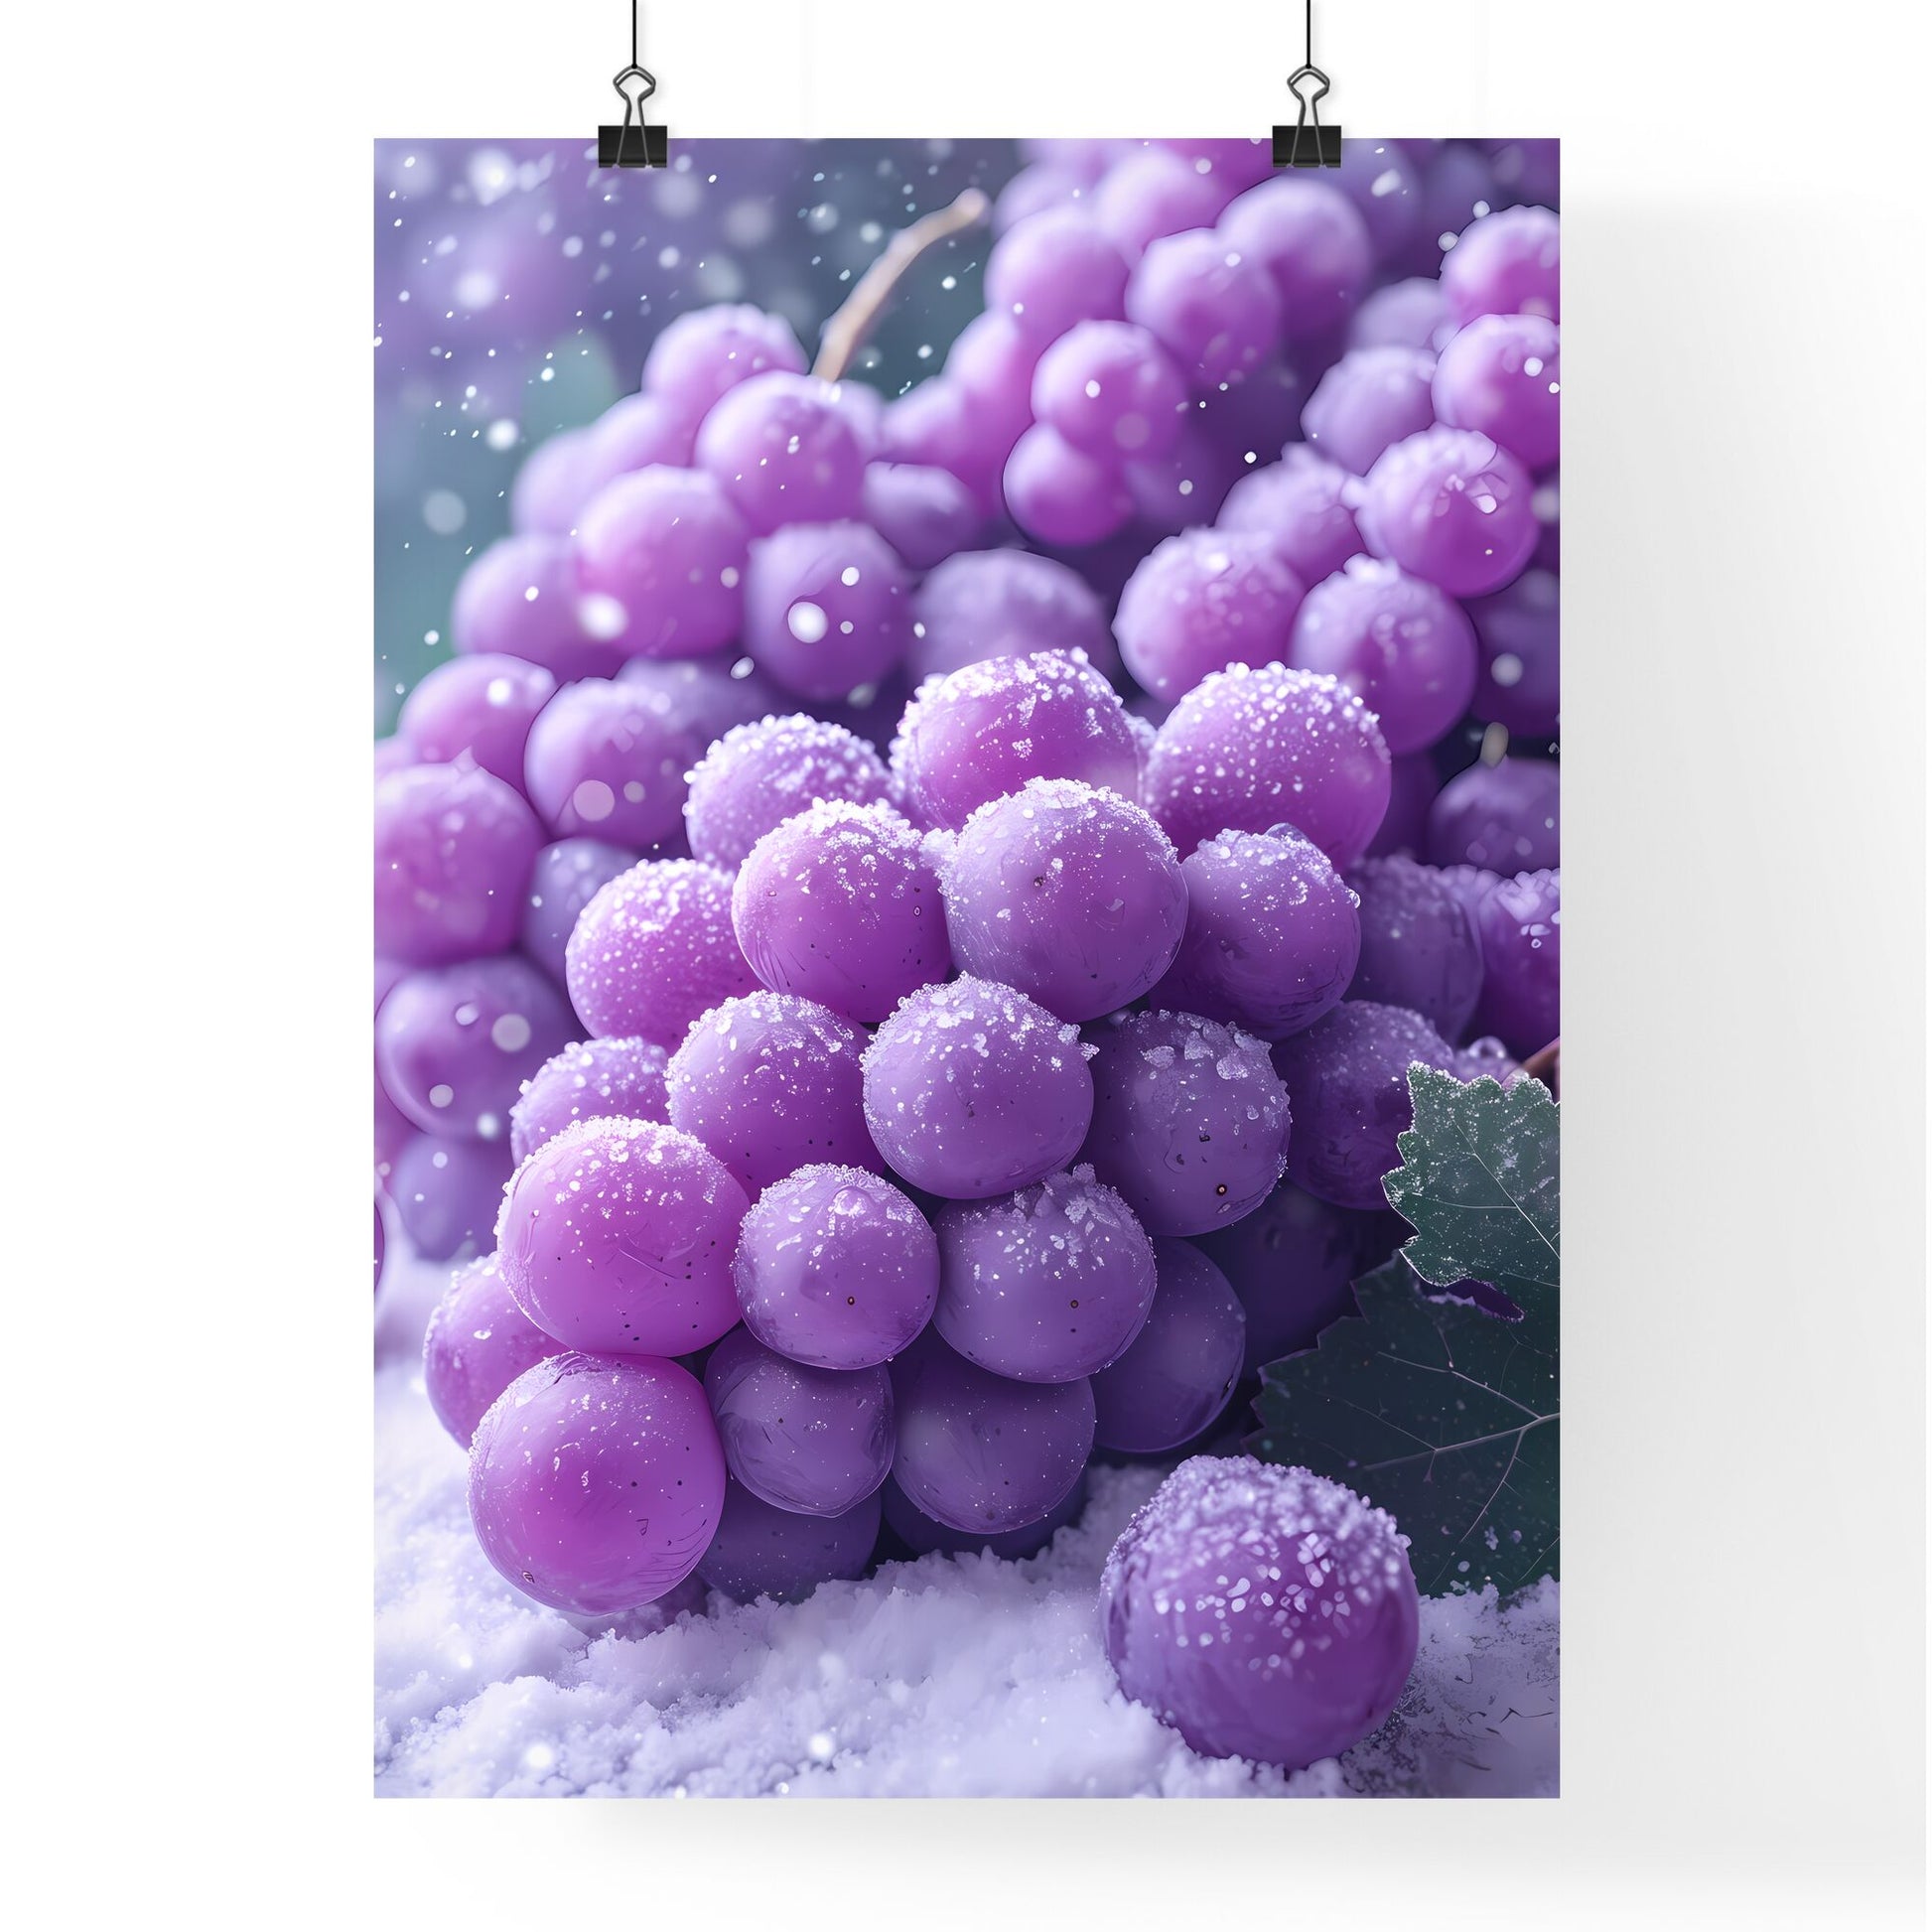 A bunch of purple grapes covered in snow - Art print of a bunch of purple grapes with leaves and snow Default Title